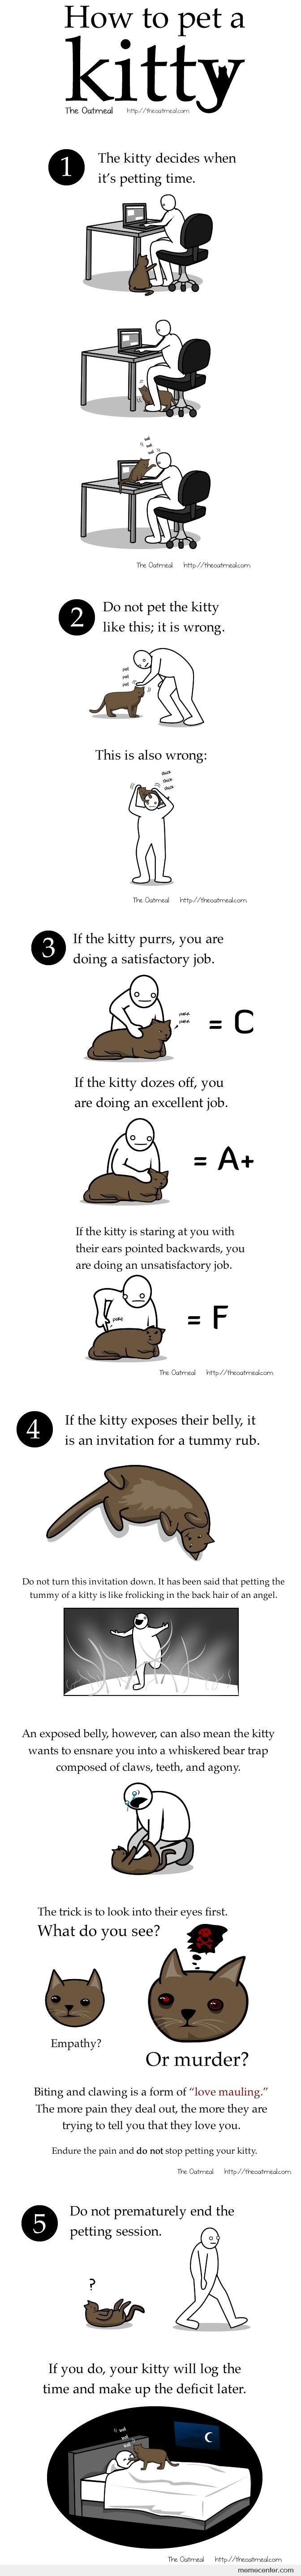 How To Pet A Kitty - By Oatmeal